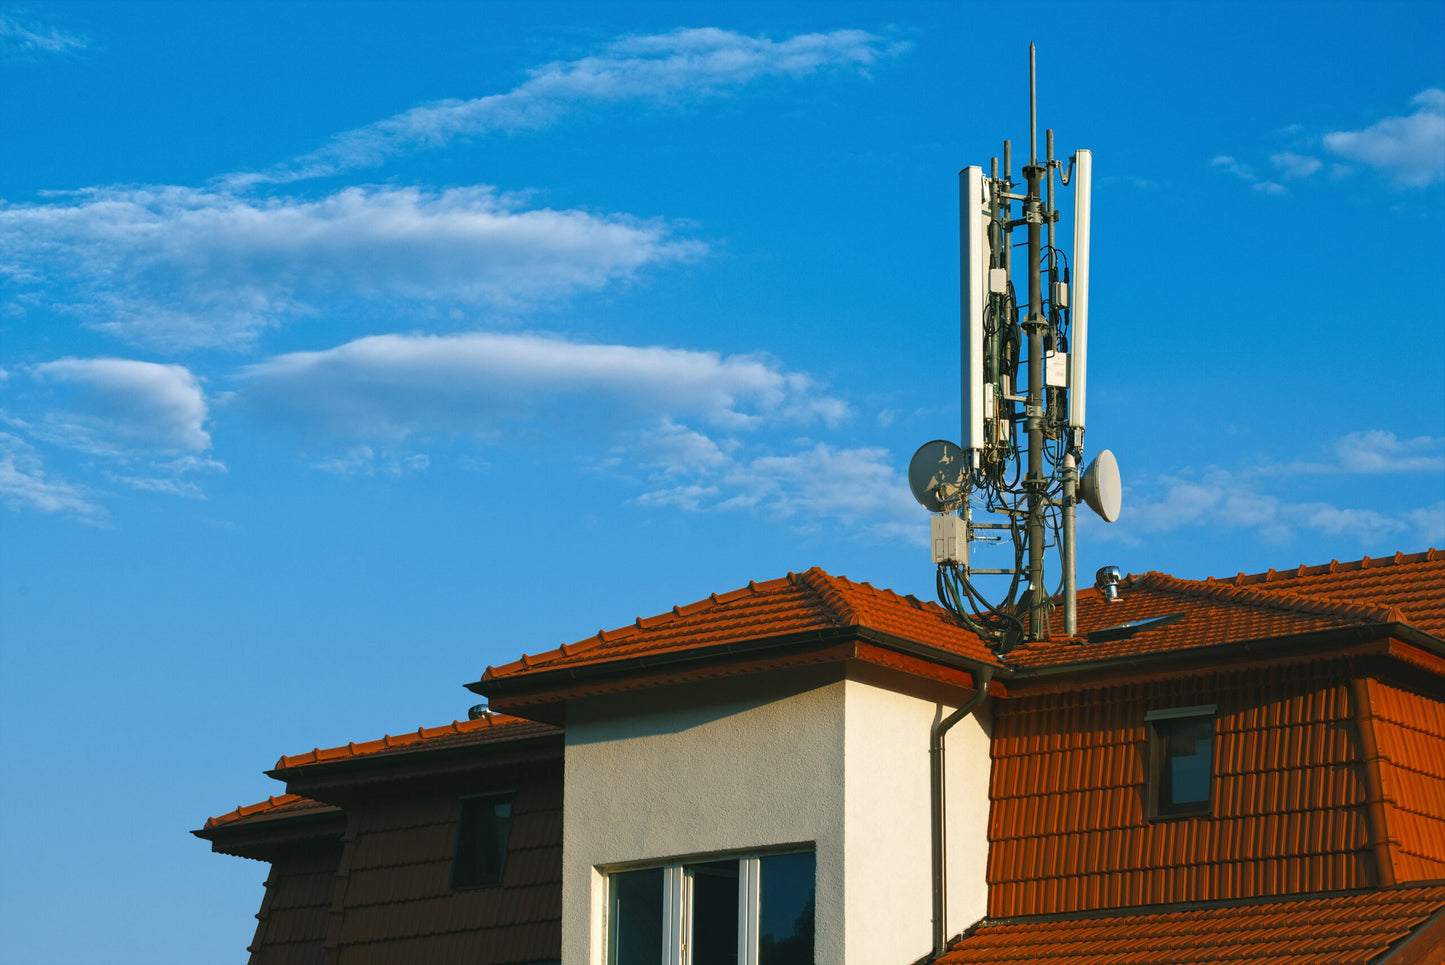 Photo of a 5G antenna on top of a house